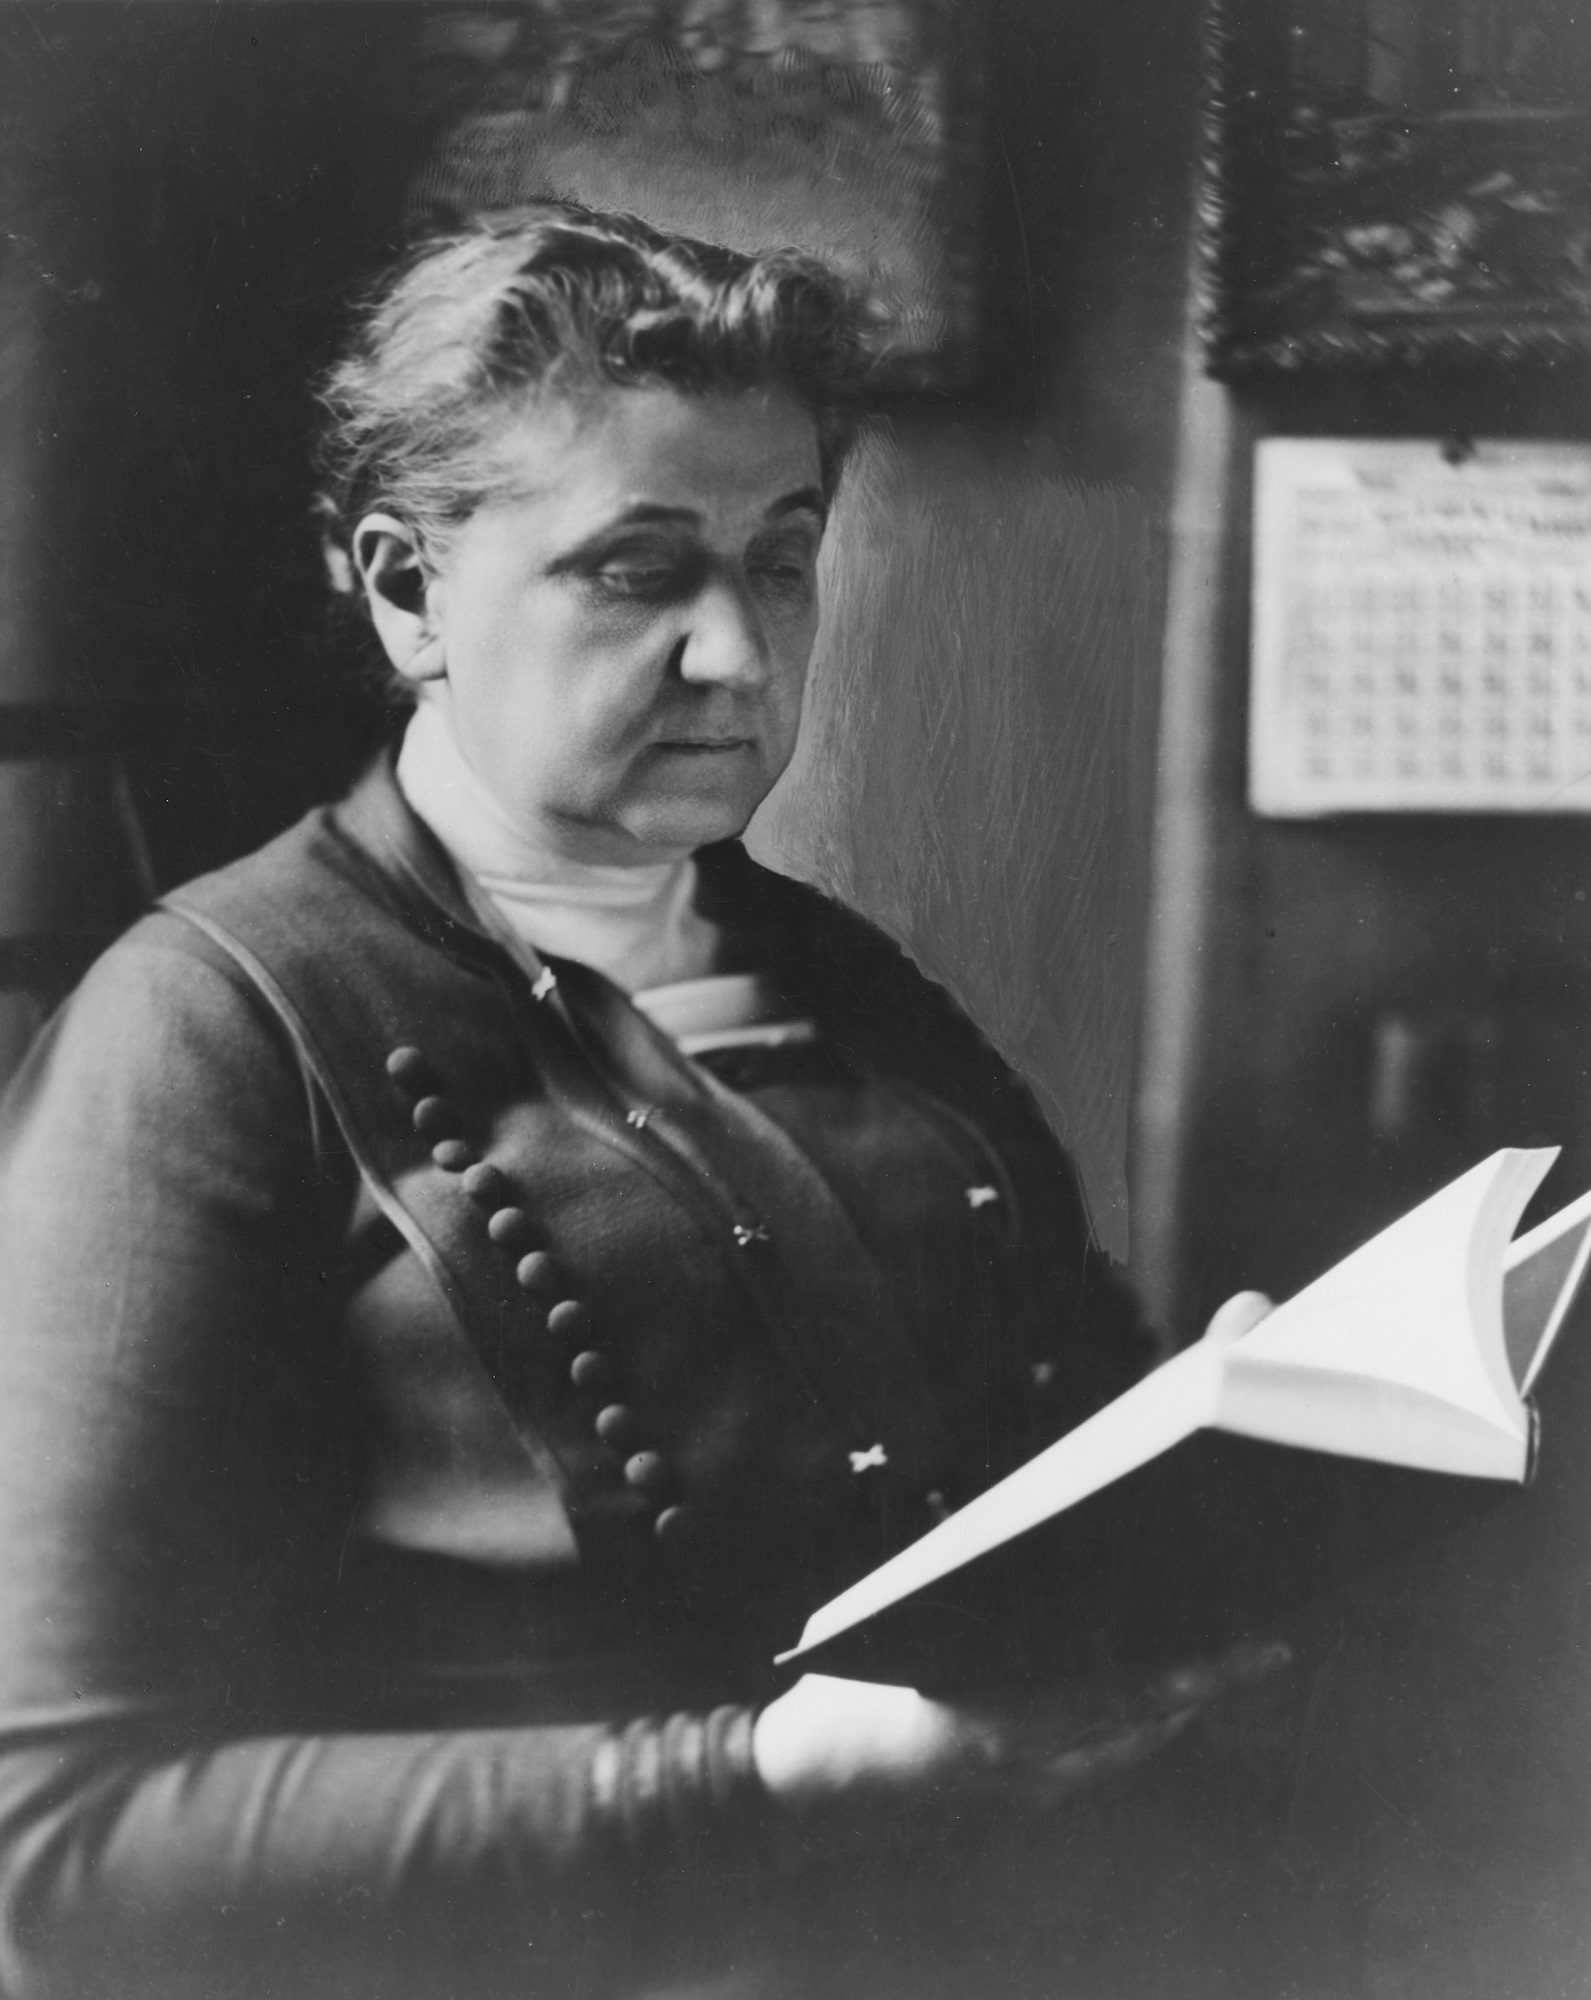 Portrait of Jane Addams, seated, reading a book, 1915.